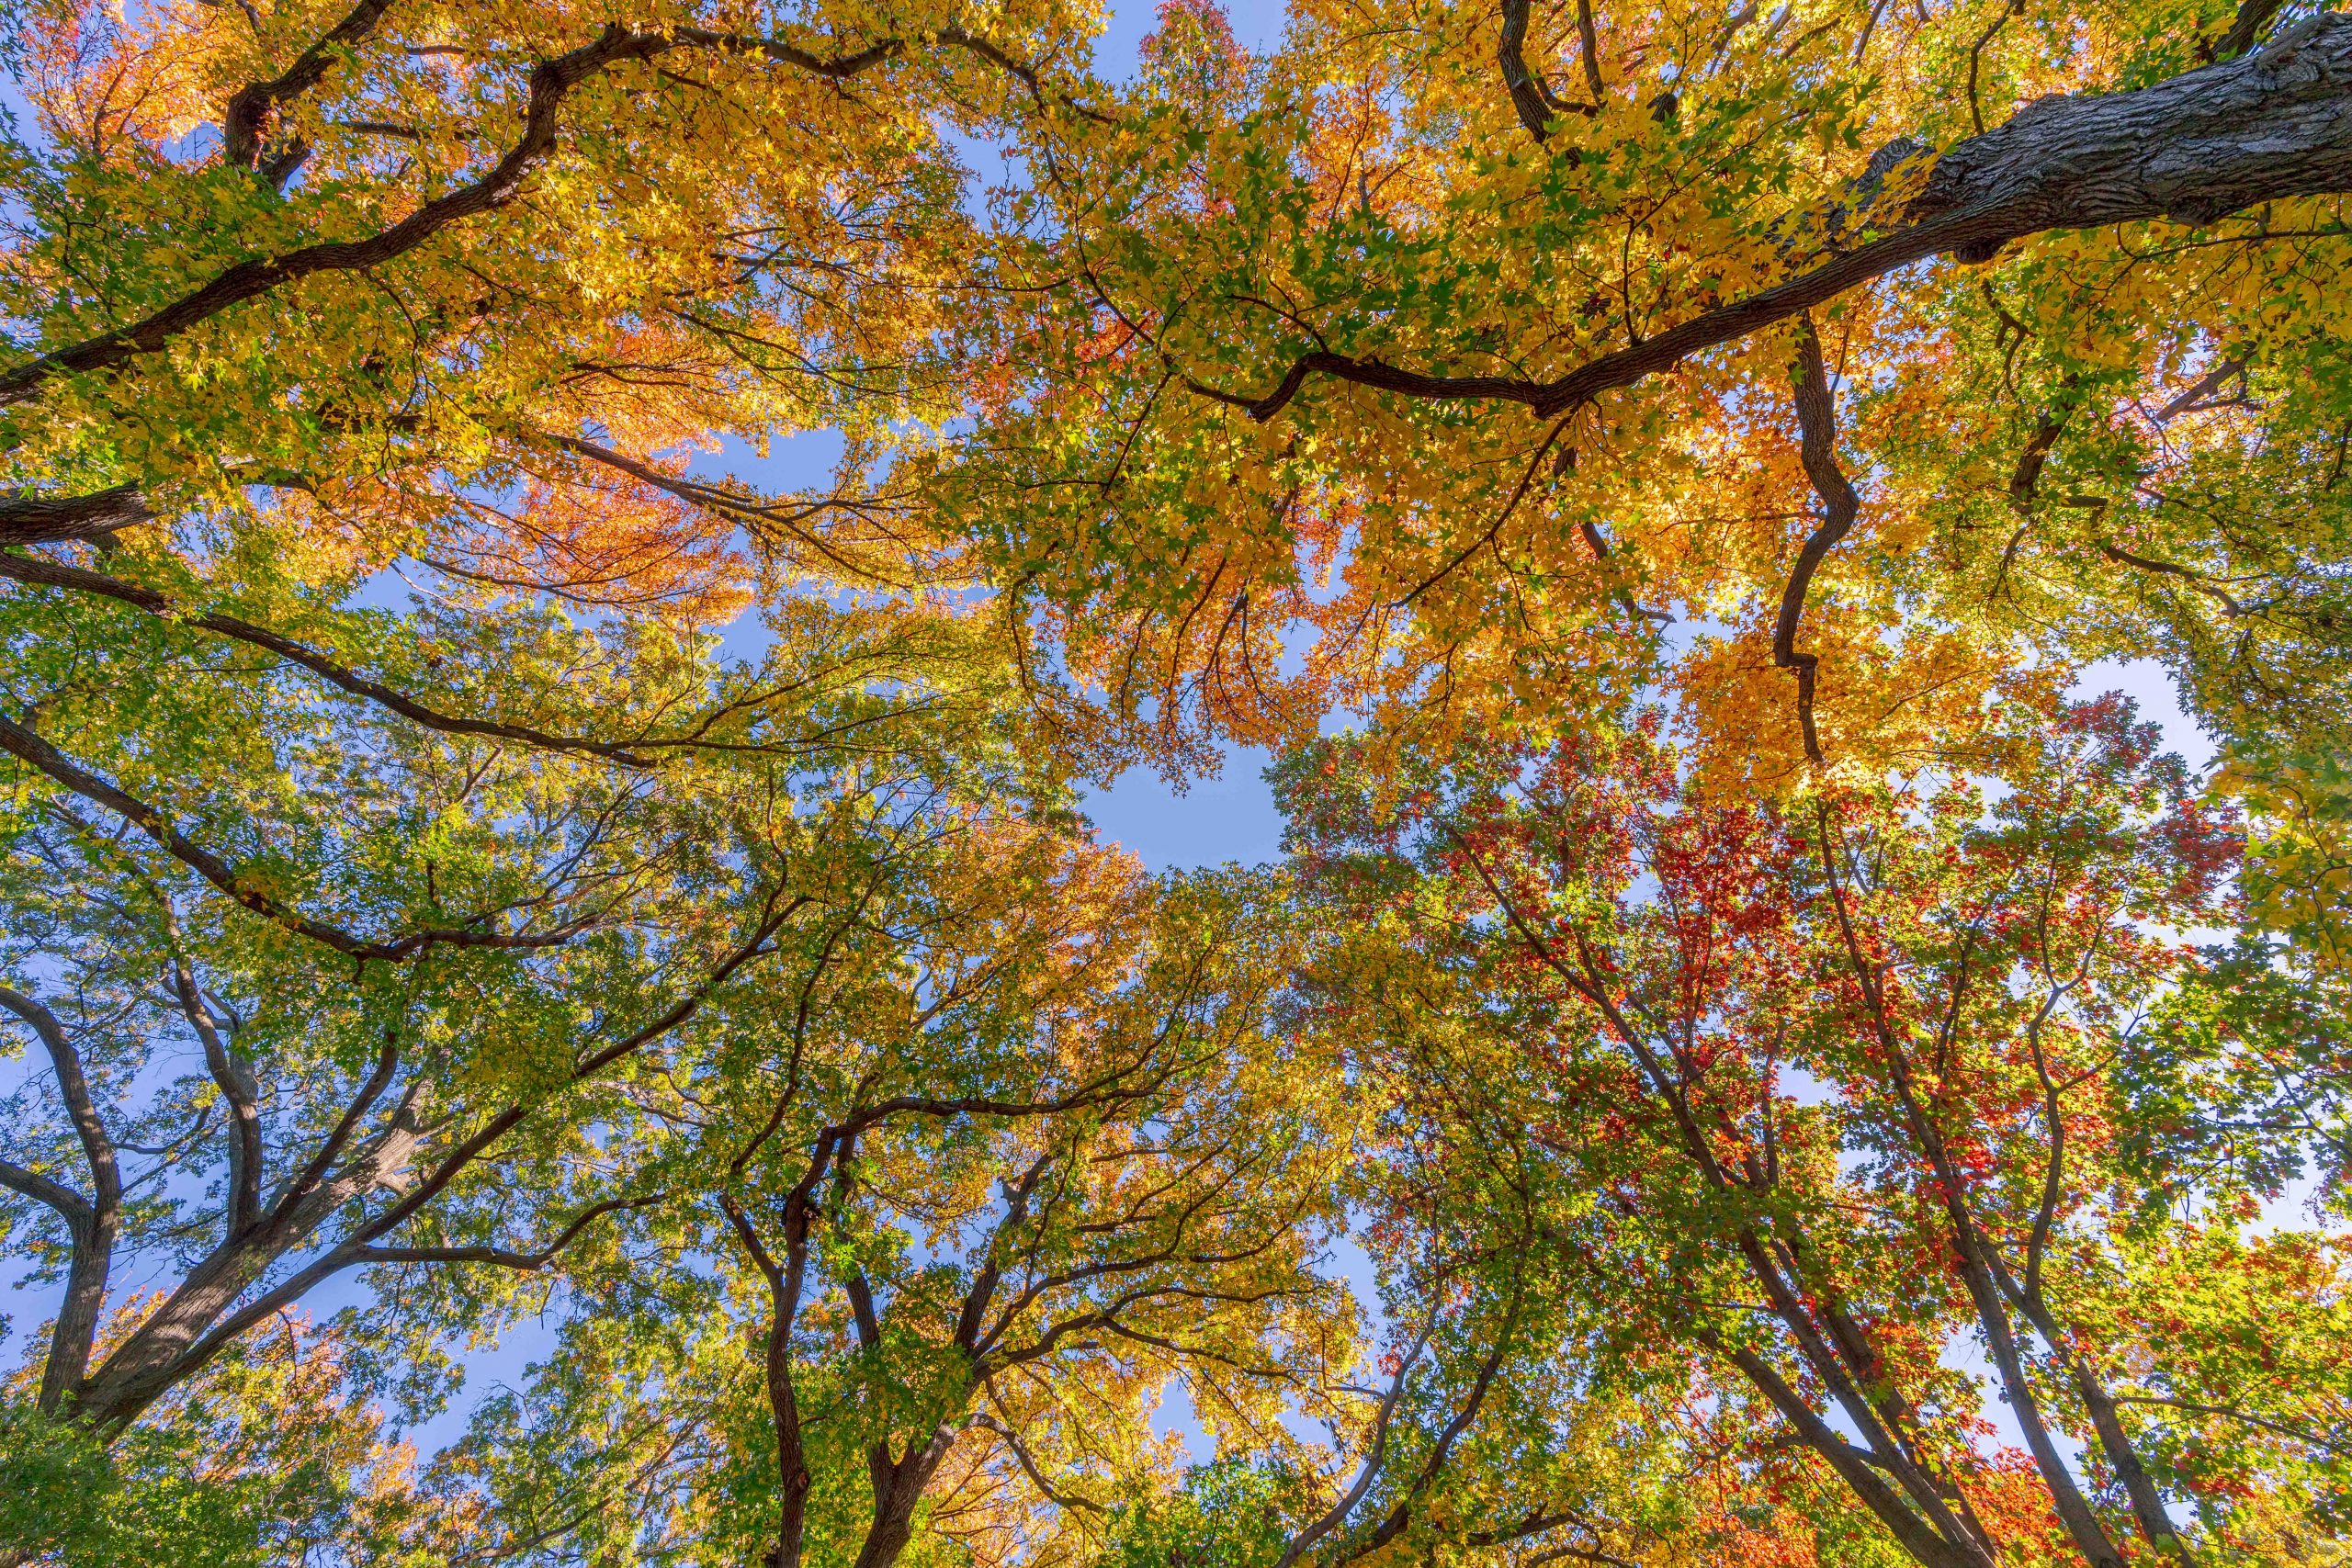 An upward-looking photo at the tree canopy in greens and yellows, blue sky visible beyond